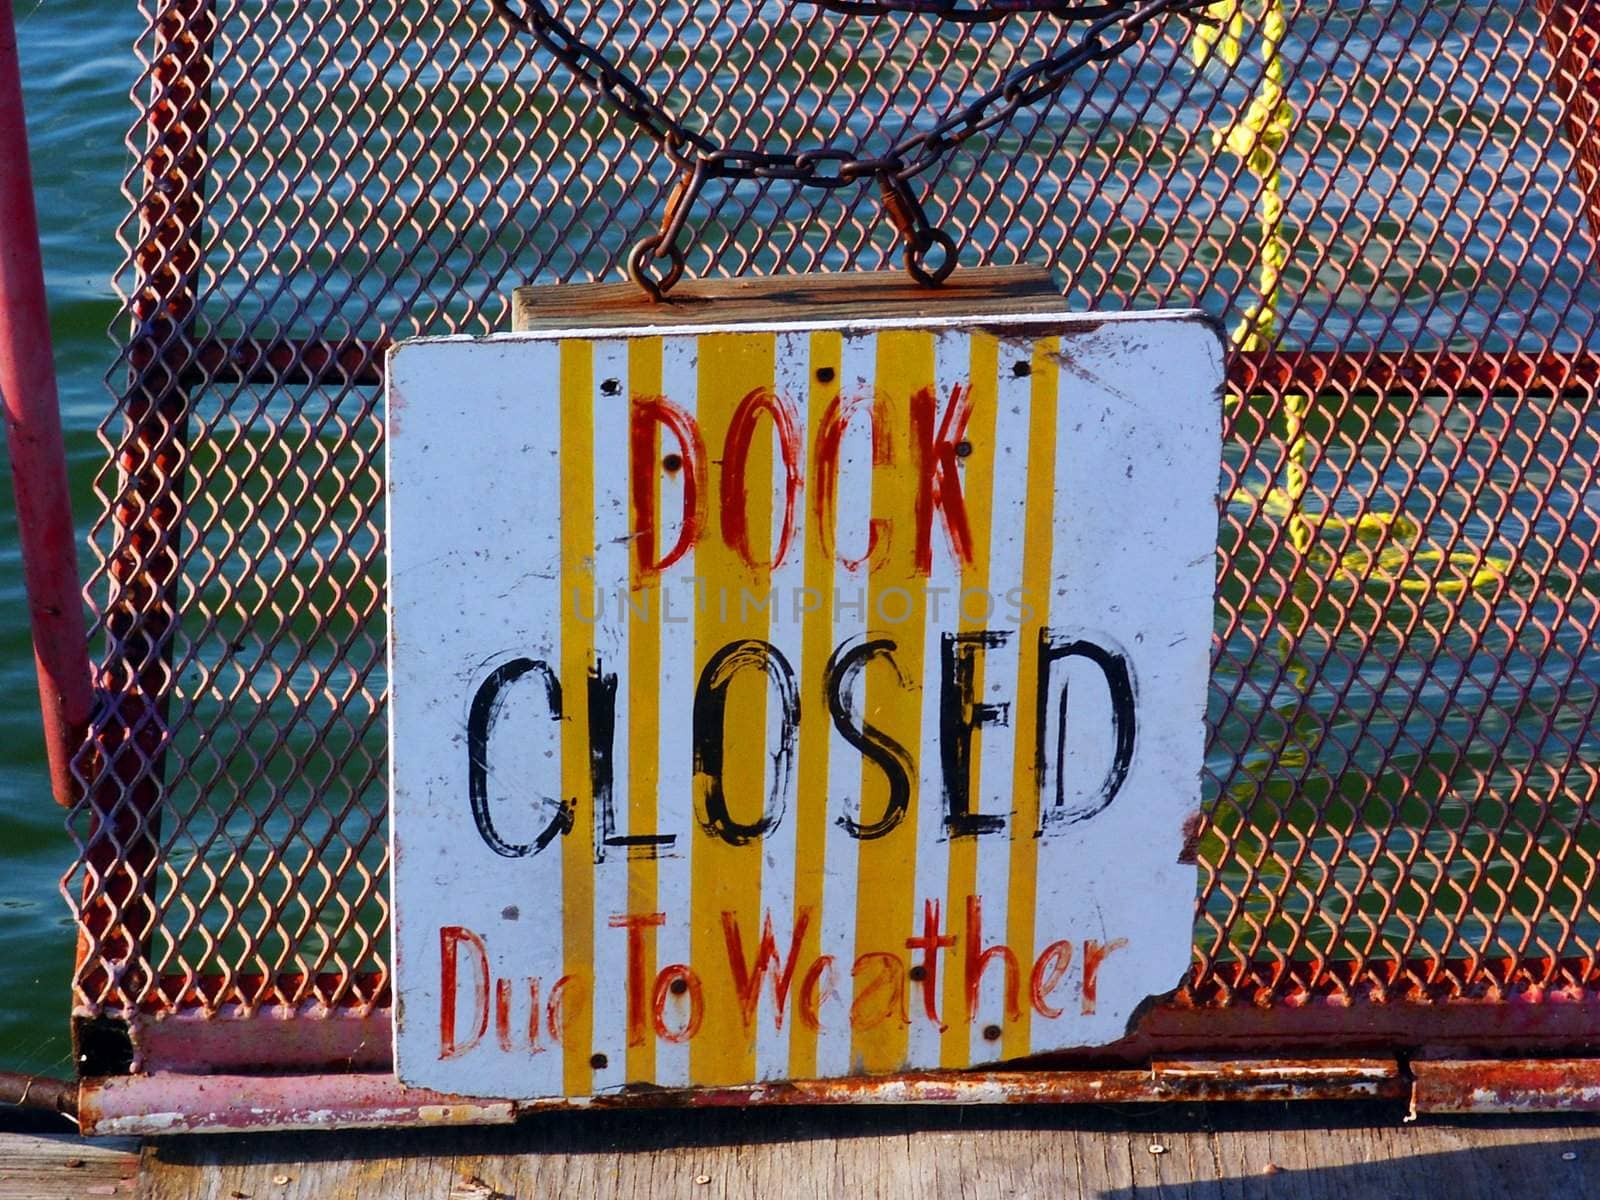 A "Dock Closed Due To Weather" sign.